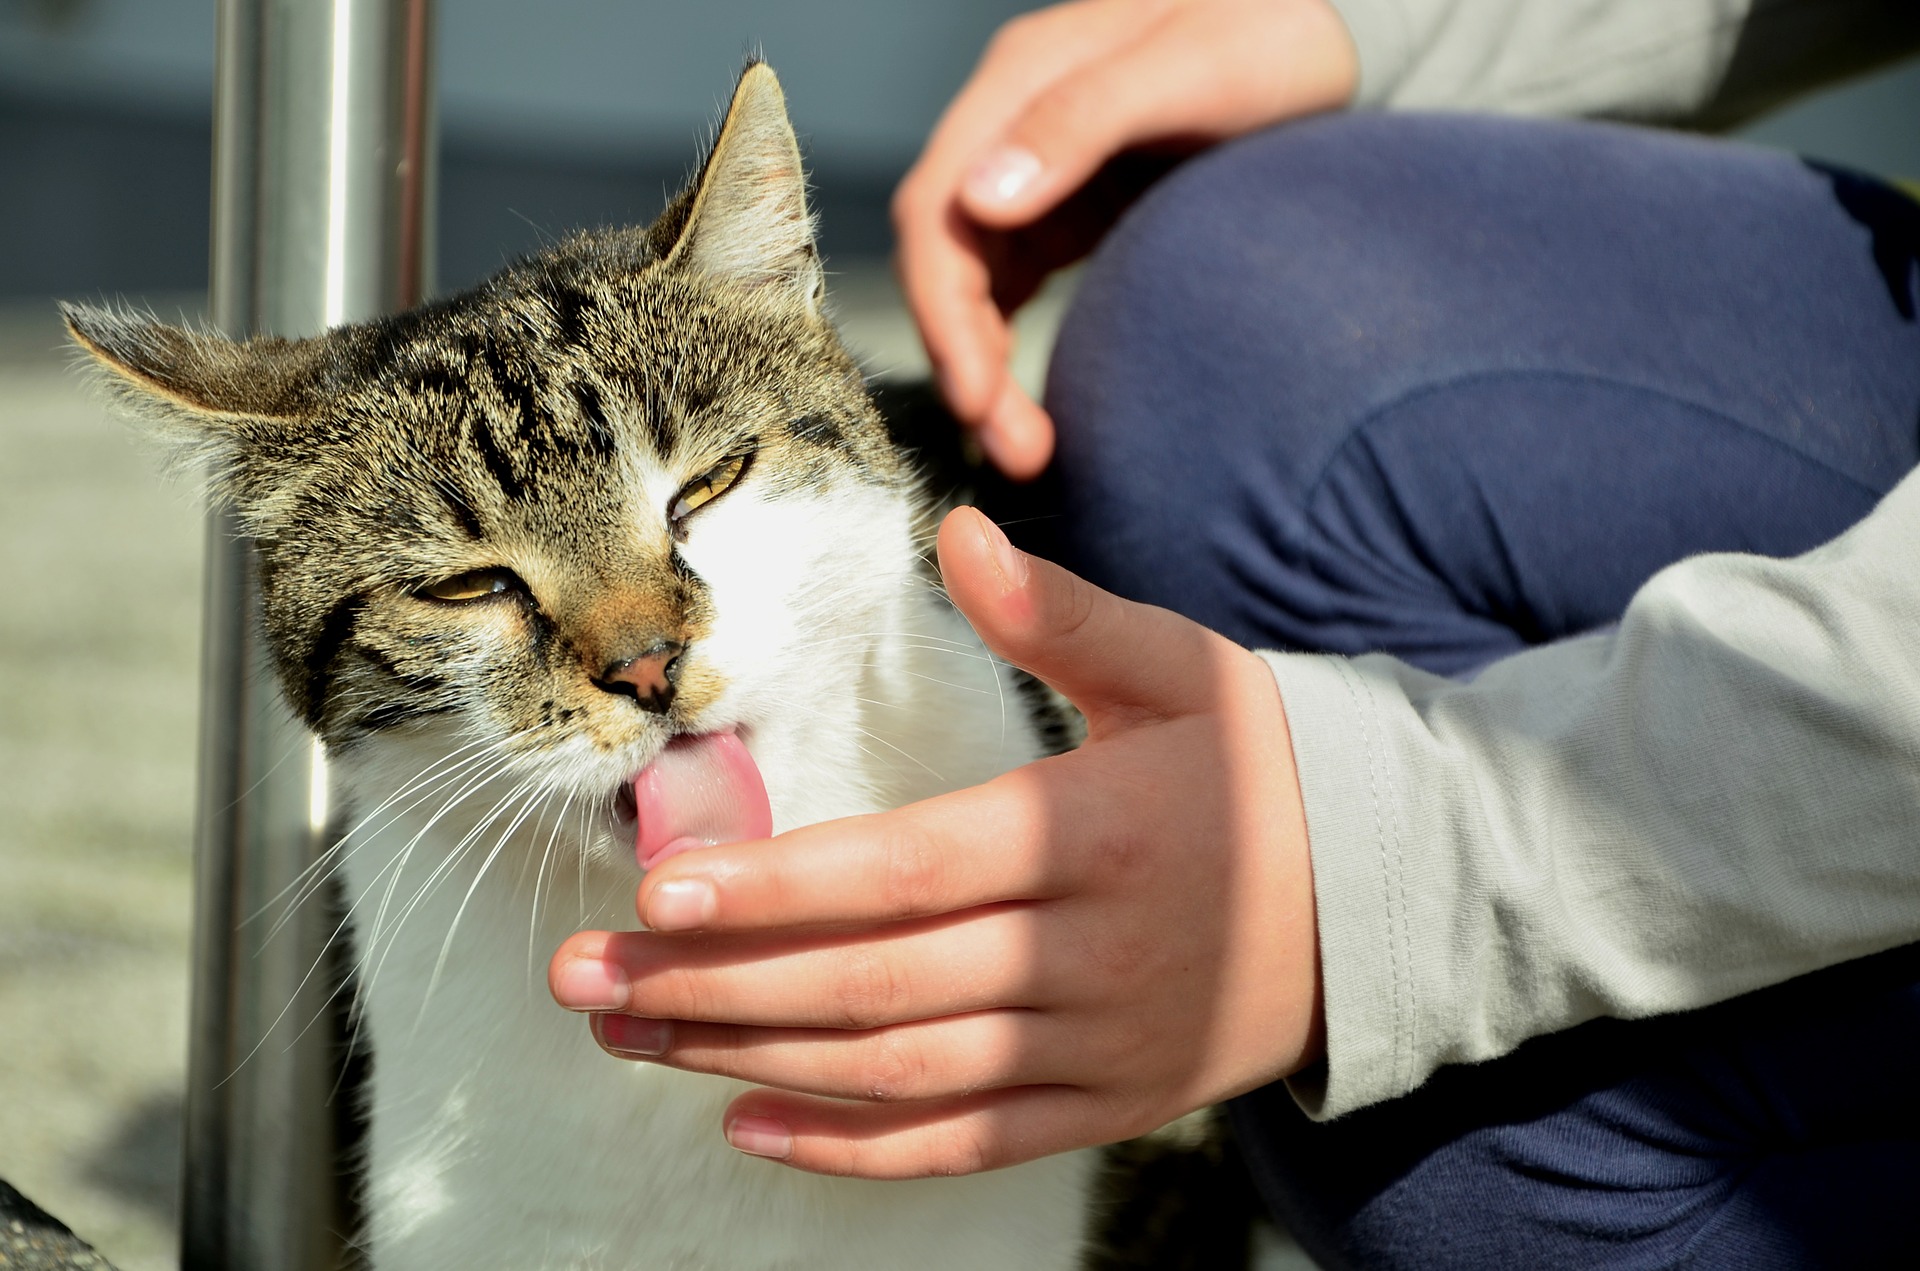 cat-licking hand can trasmit rabies